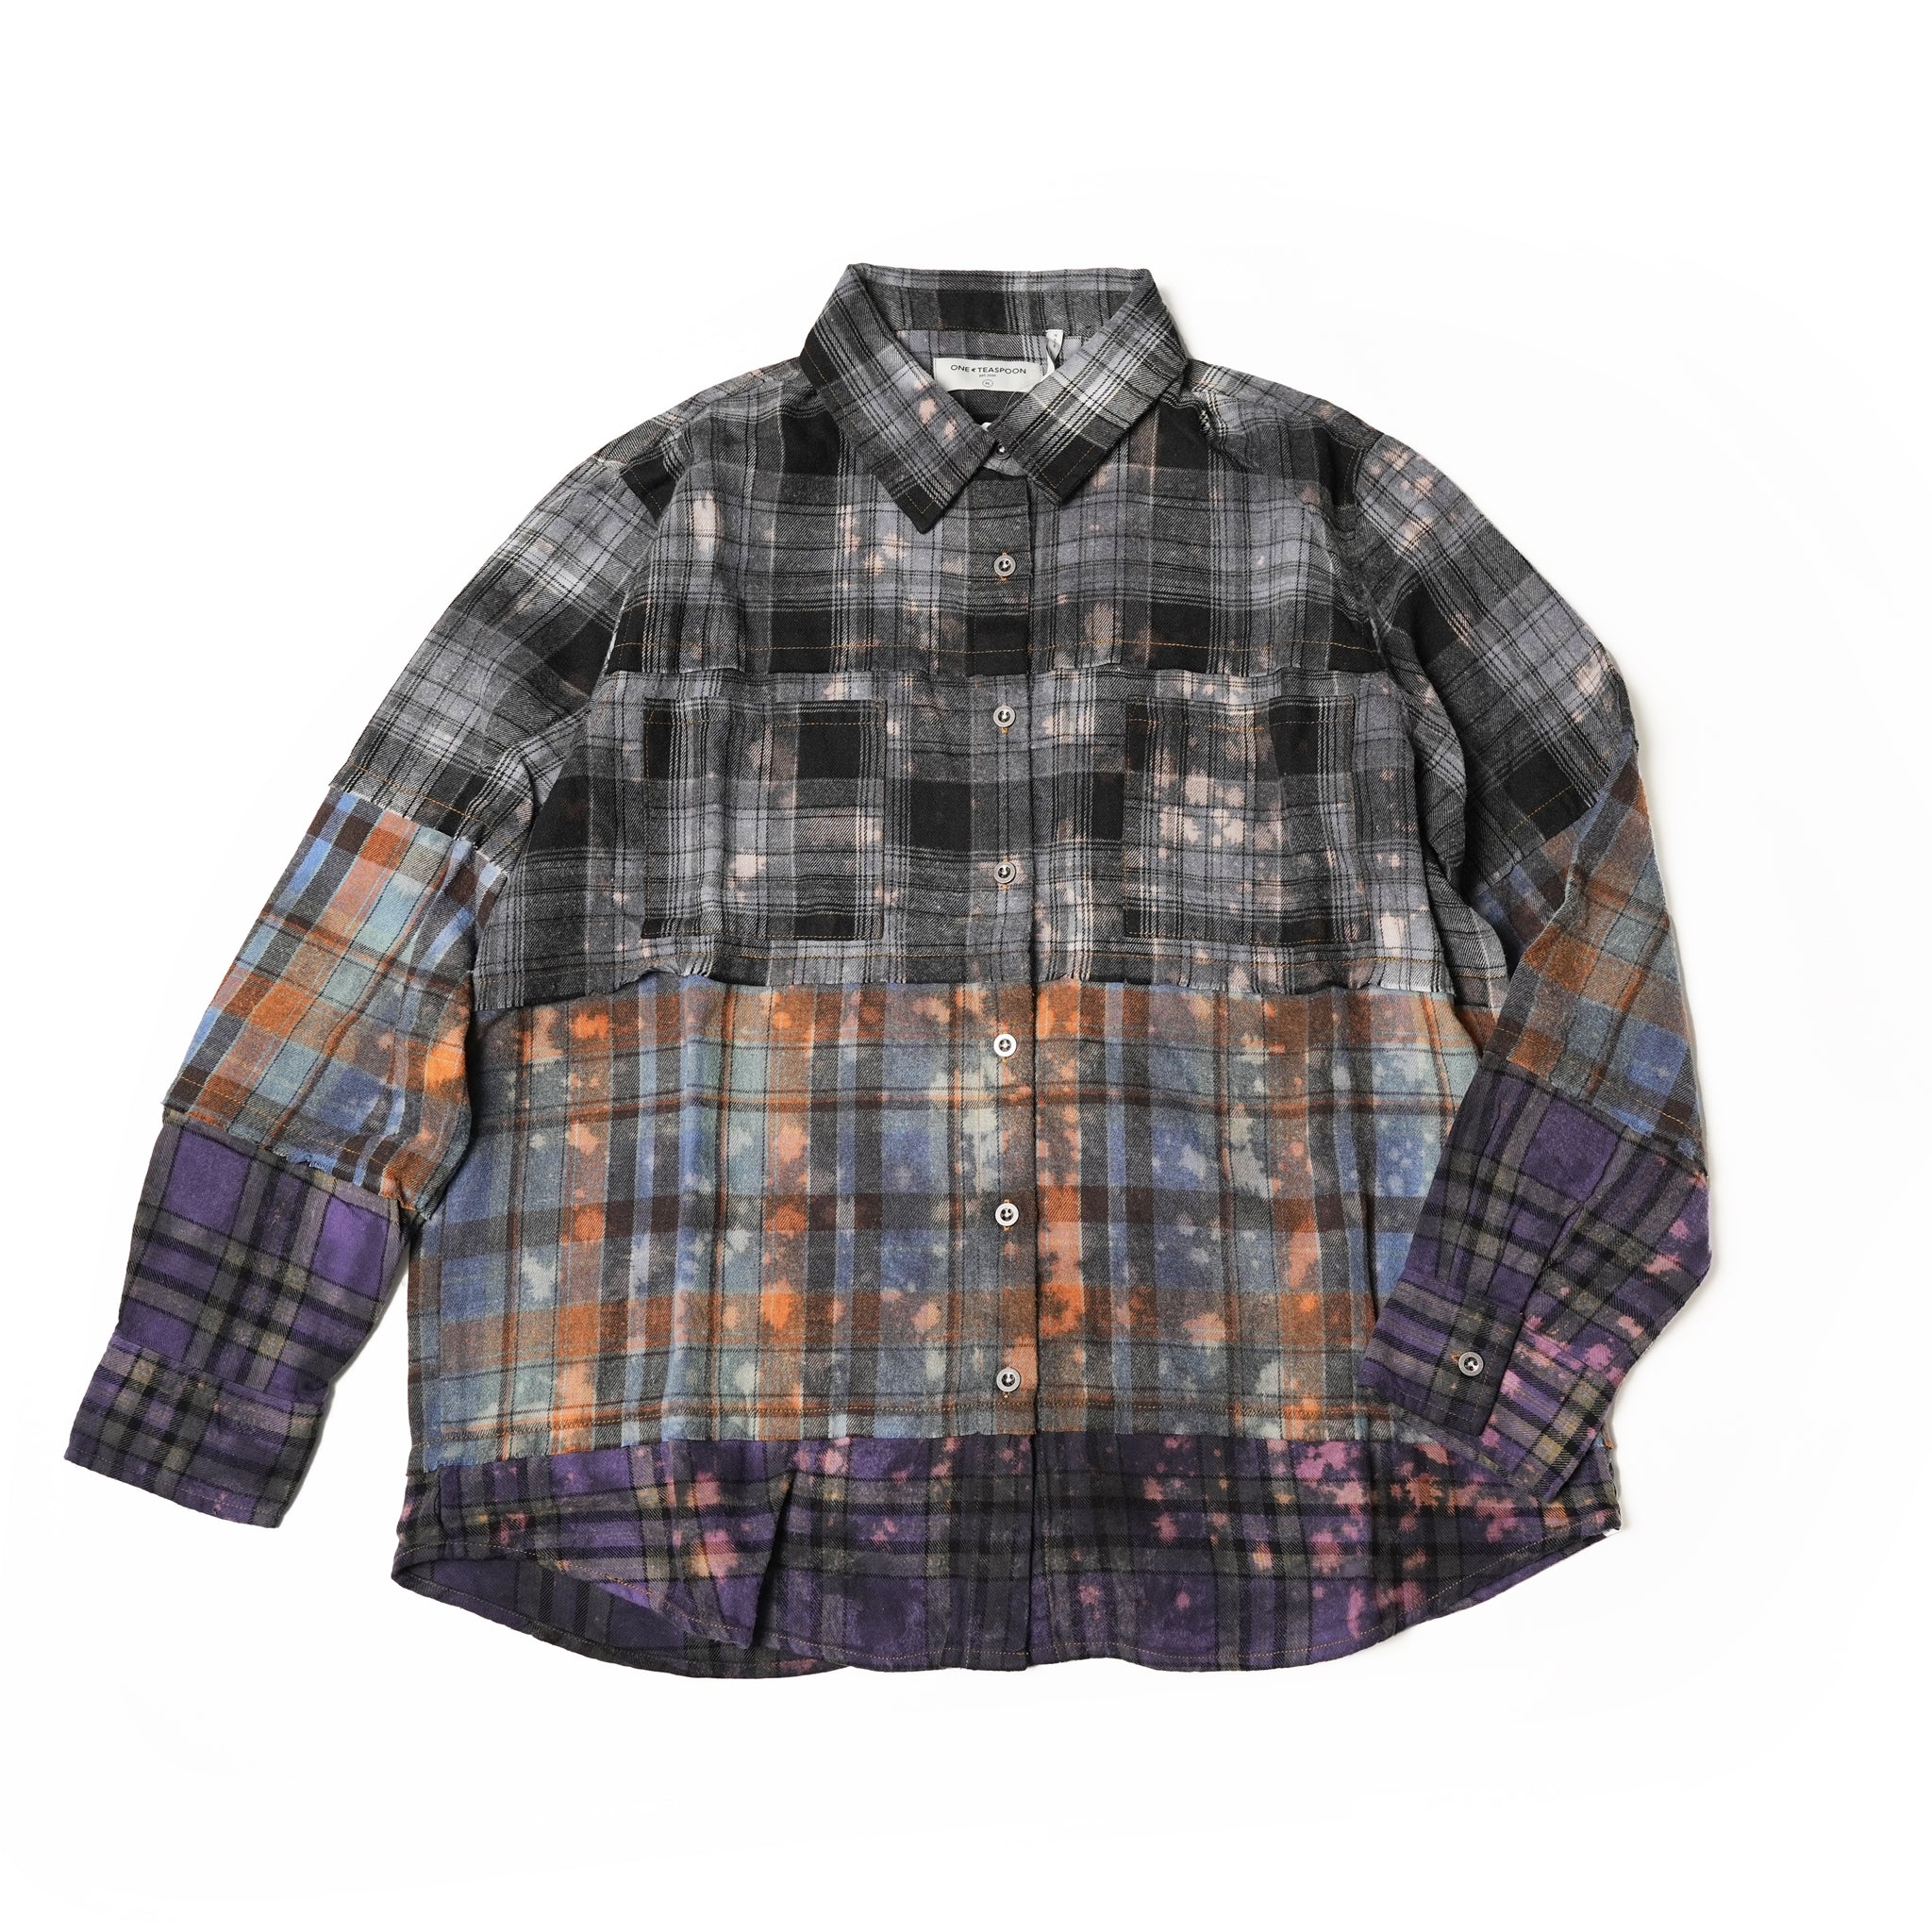 No:25970 | Name:MIXED FLANNEL SHIRT | Color:Flannel【ONE TEASPOON_ワンティースプーン】